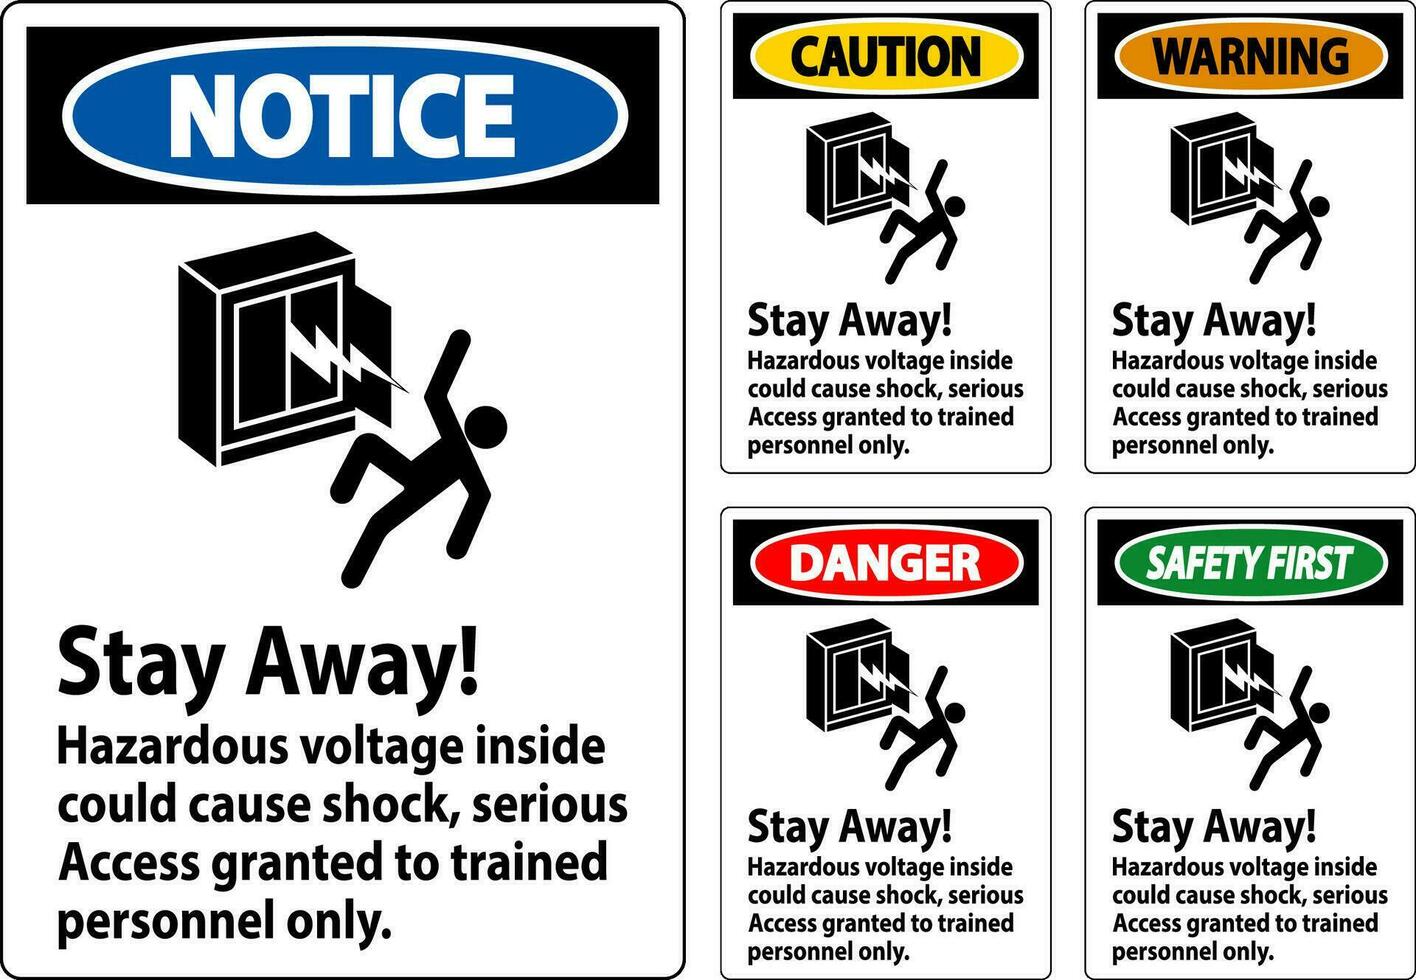 Warning Sign Stay Away Hazardous Voltage Inside Could Cause Shock, Access Granted Trained Personnel Only vector